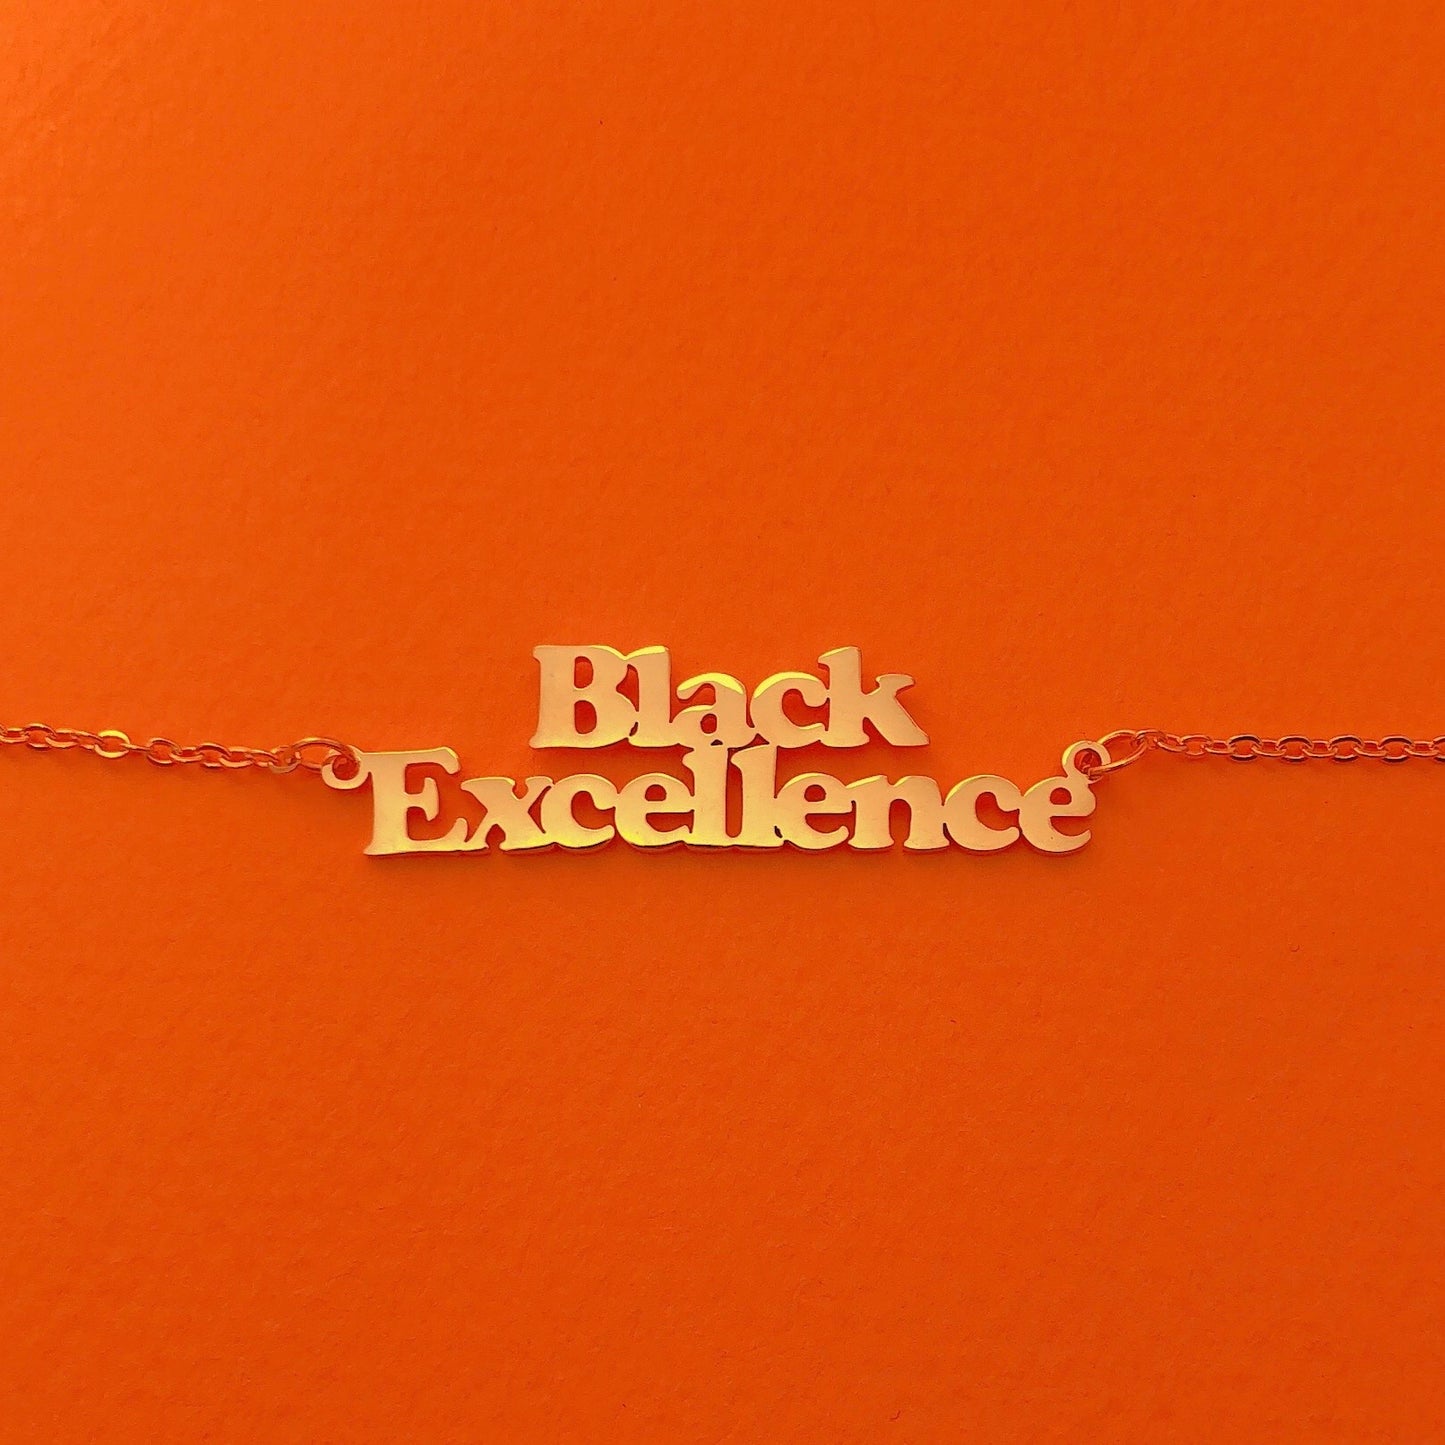 Black Excellence necklace - Brownie Points for You